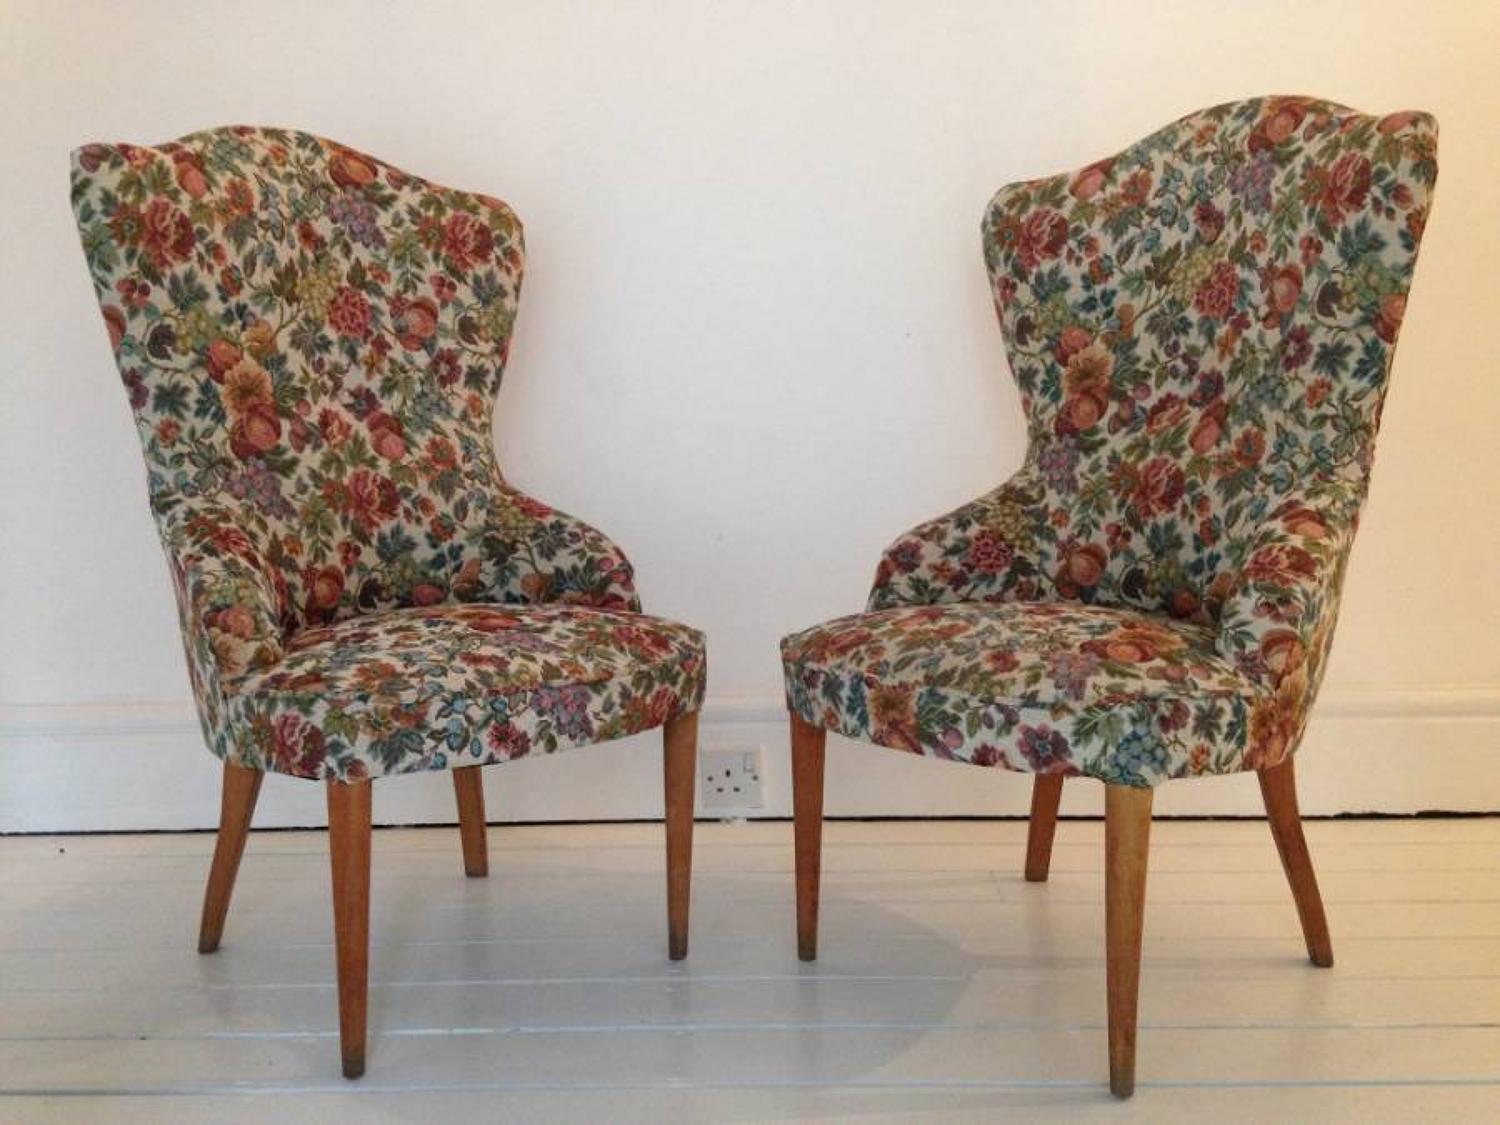 A pair of 1950s Italian chairs